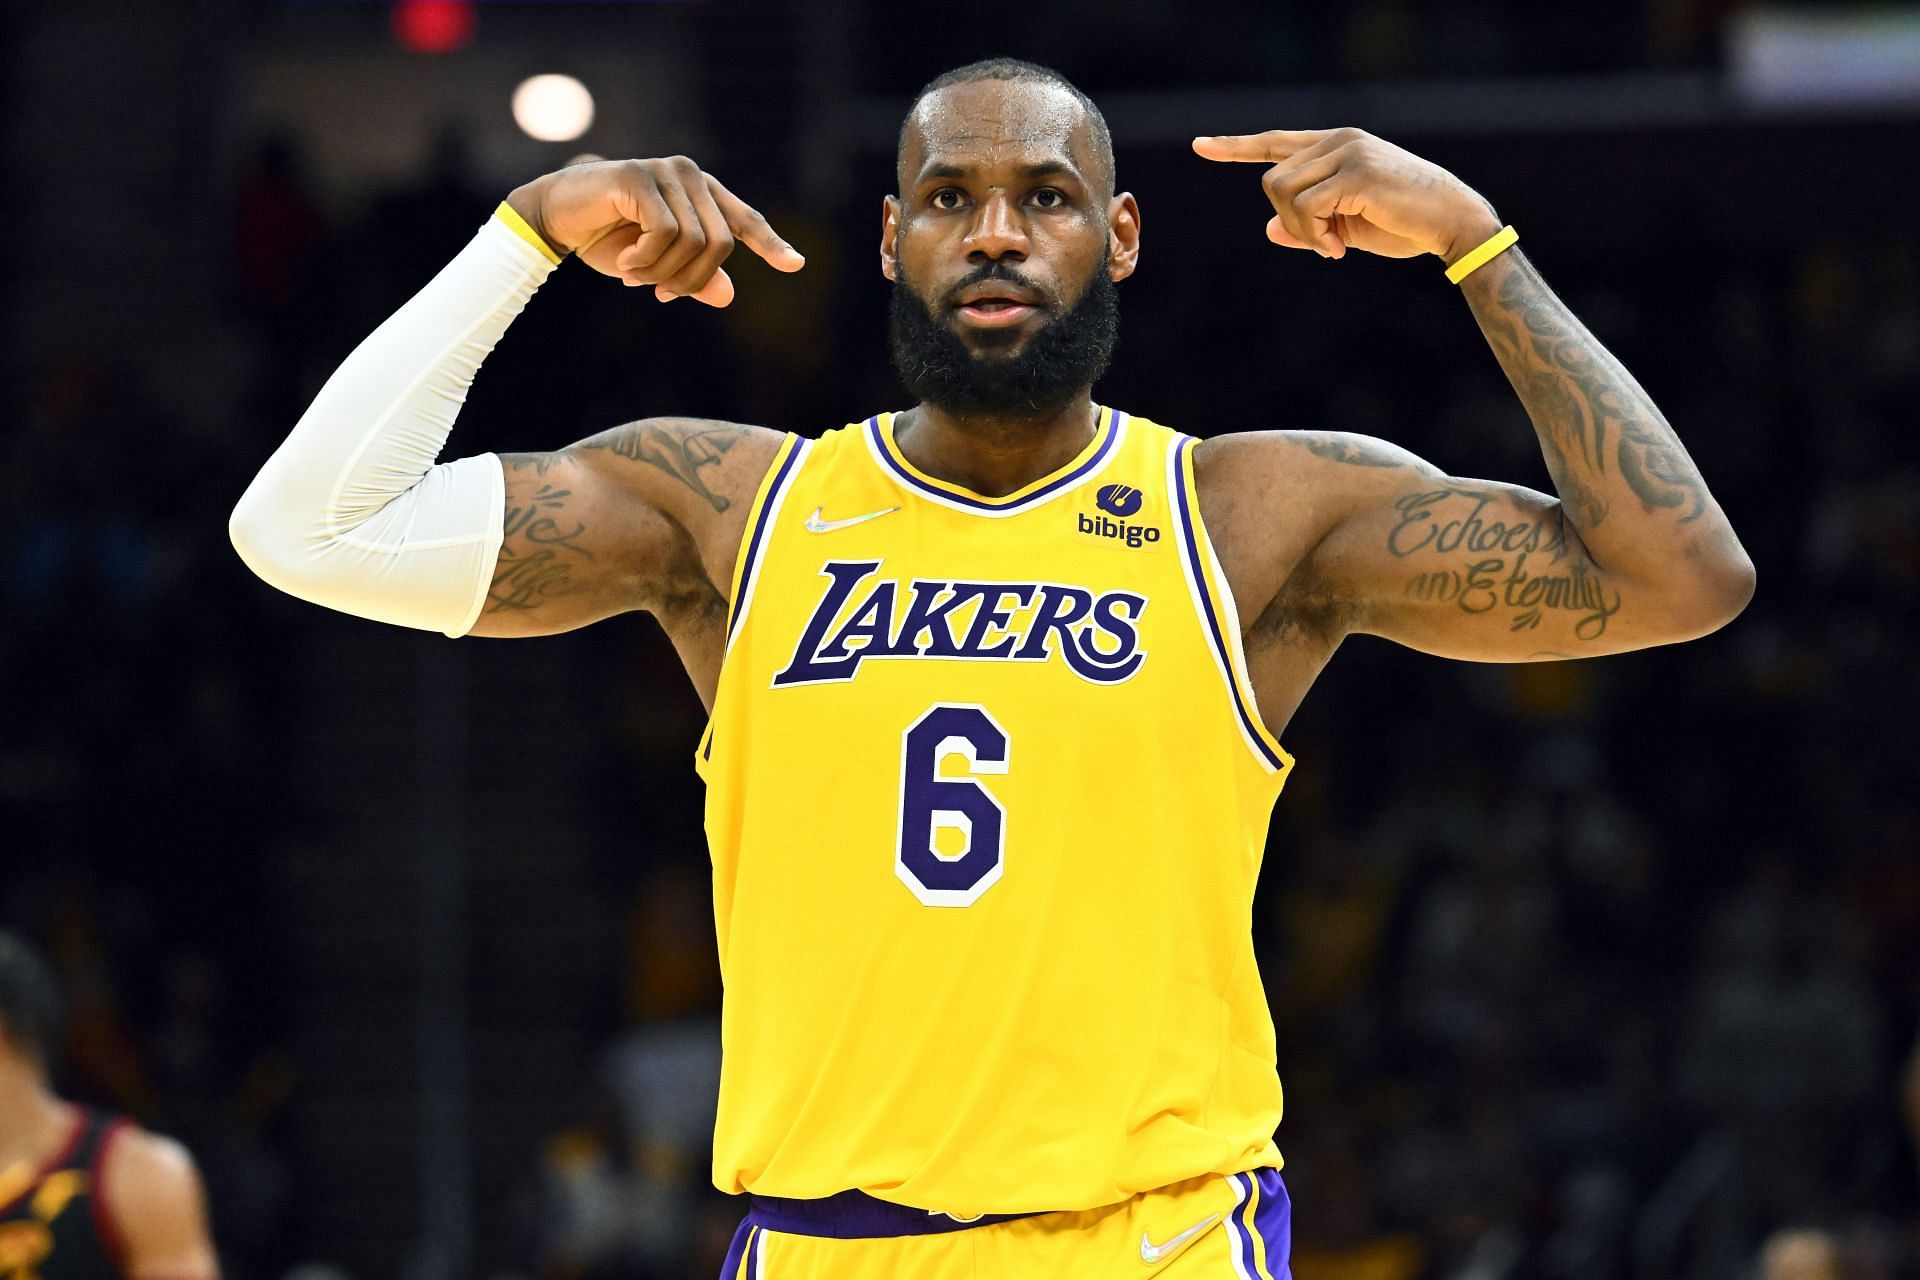 LeBron James of the LA Lakers against the Cleveland Cavaliers